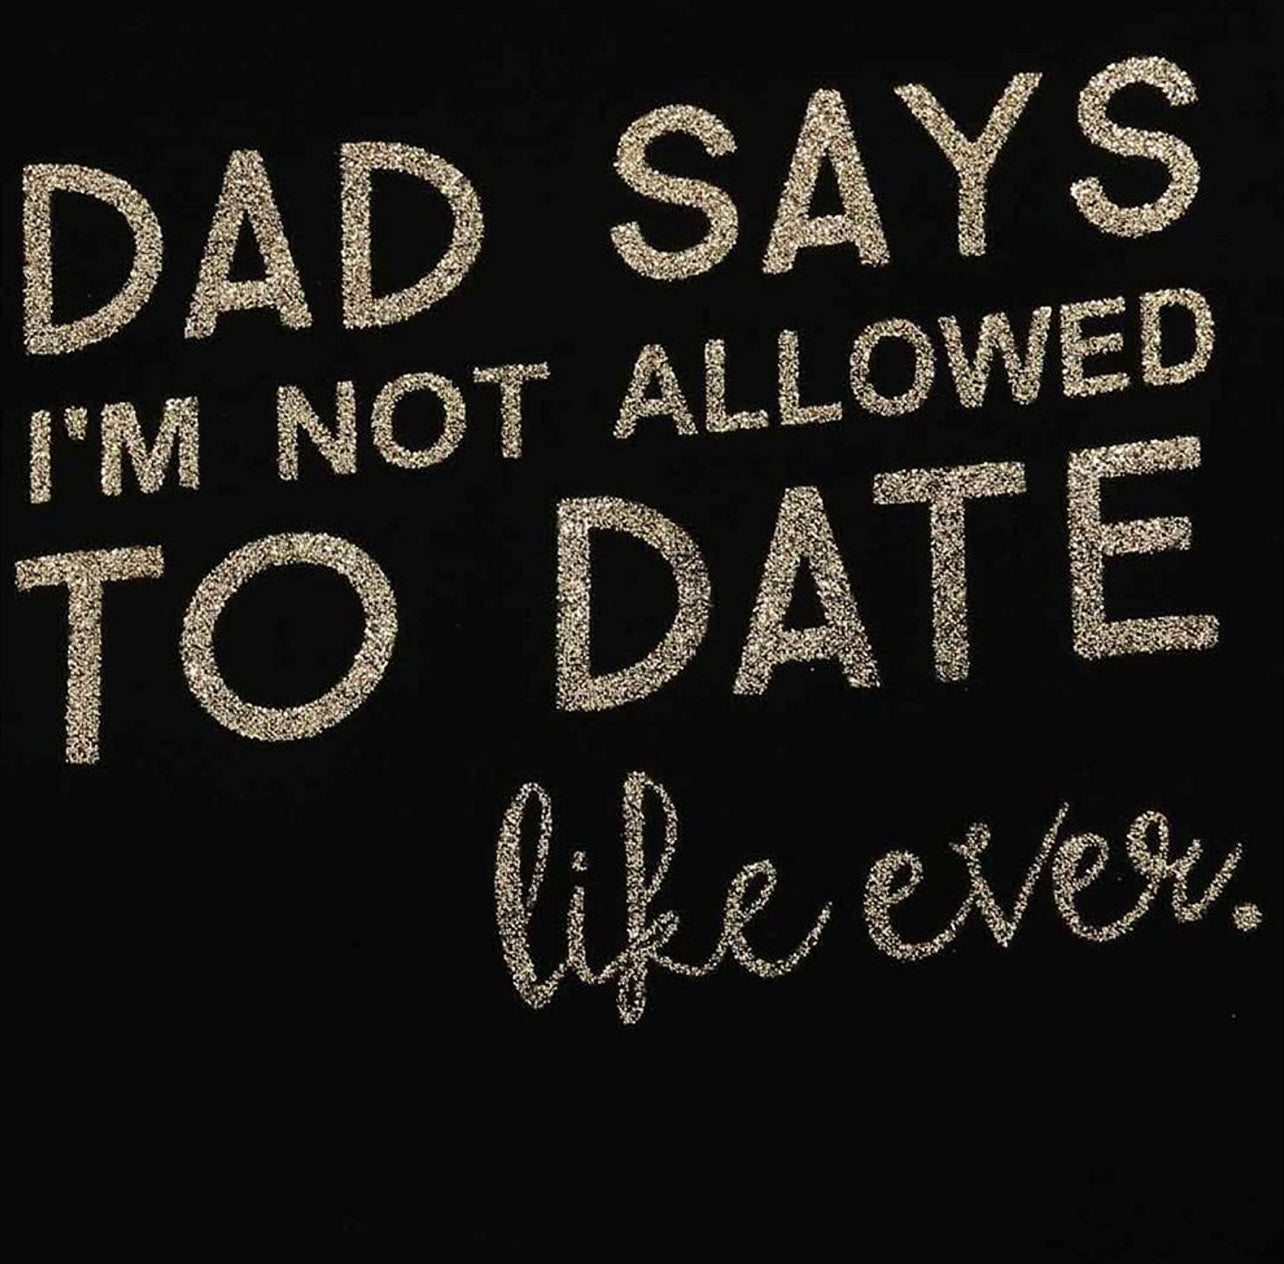 DAD SAYS